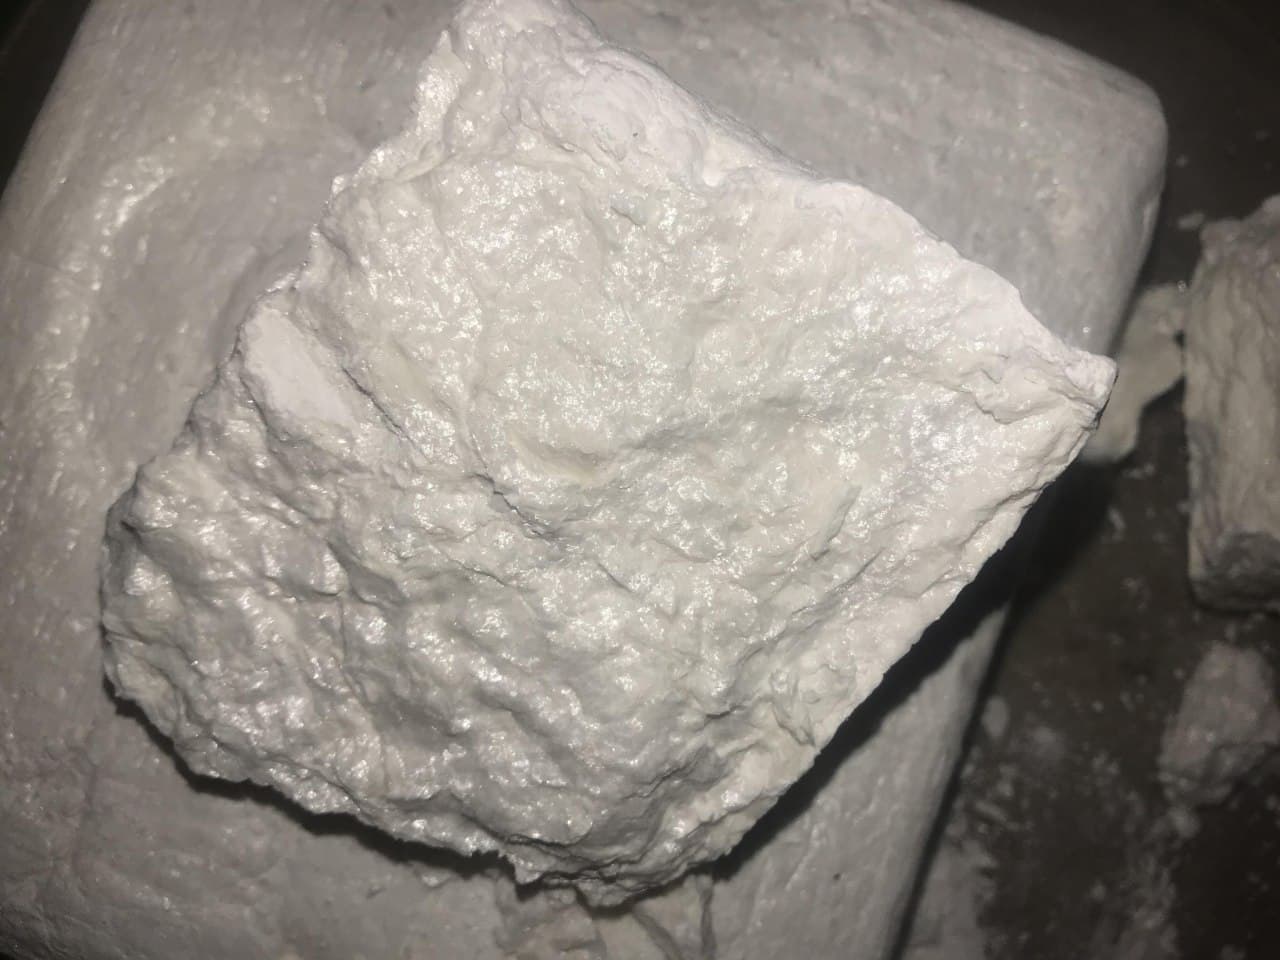 1g-28g VIP Colombian Cocaine - 80